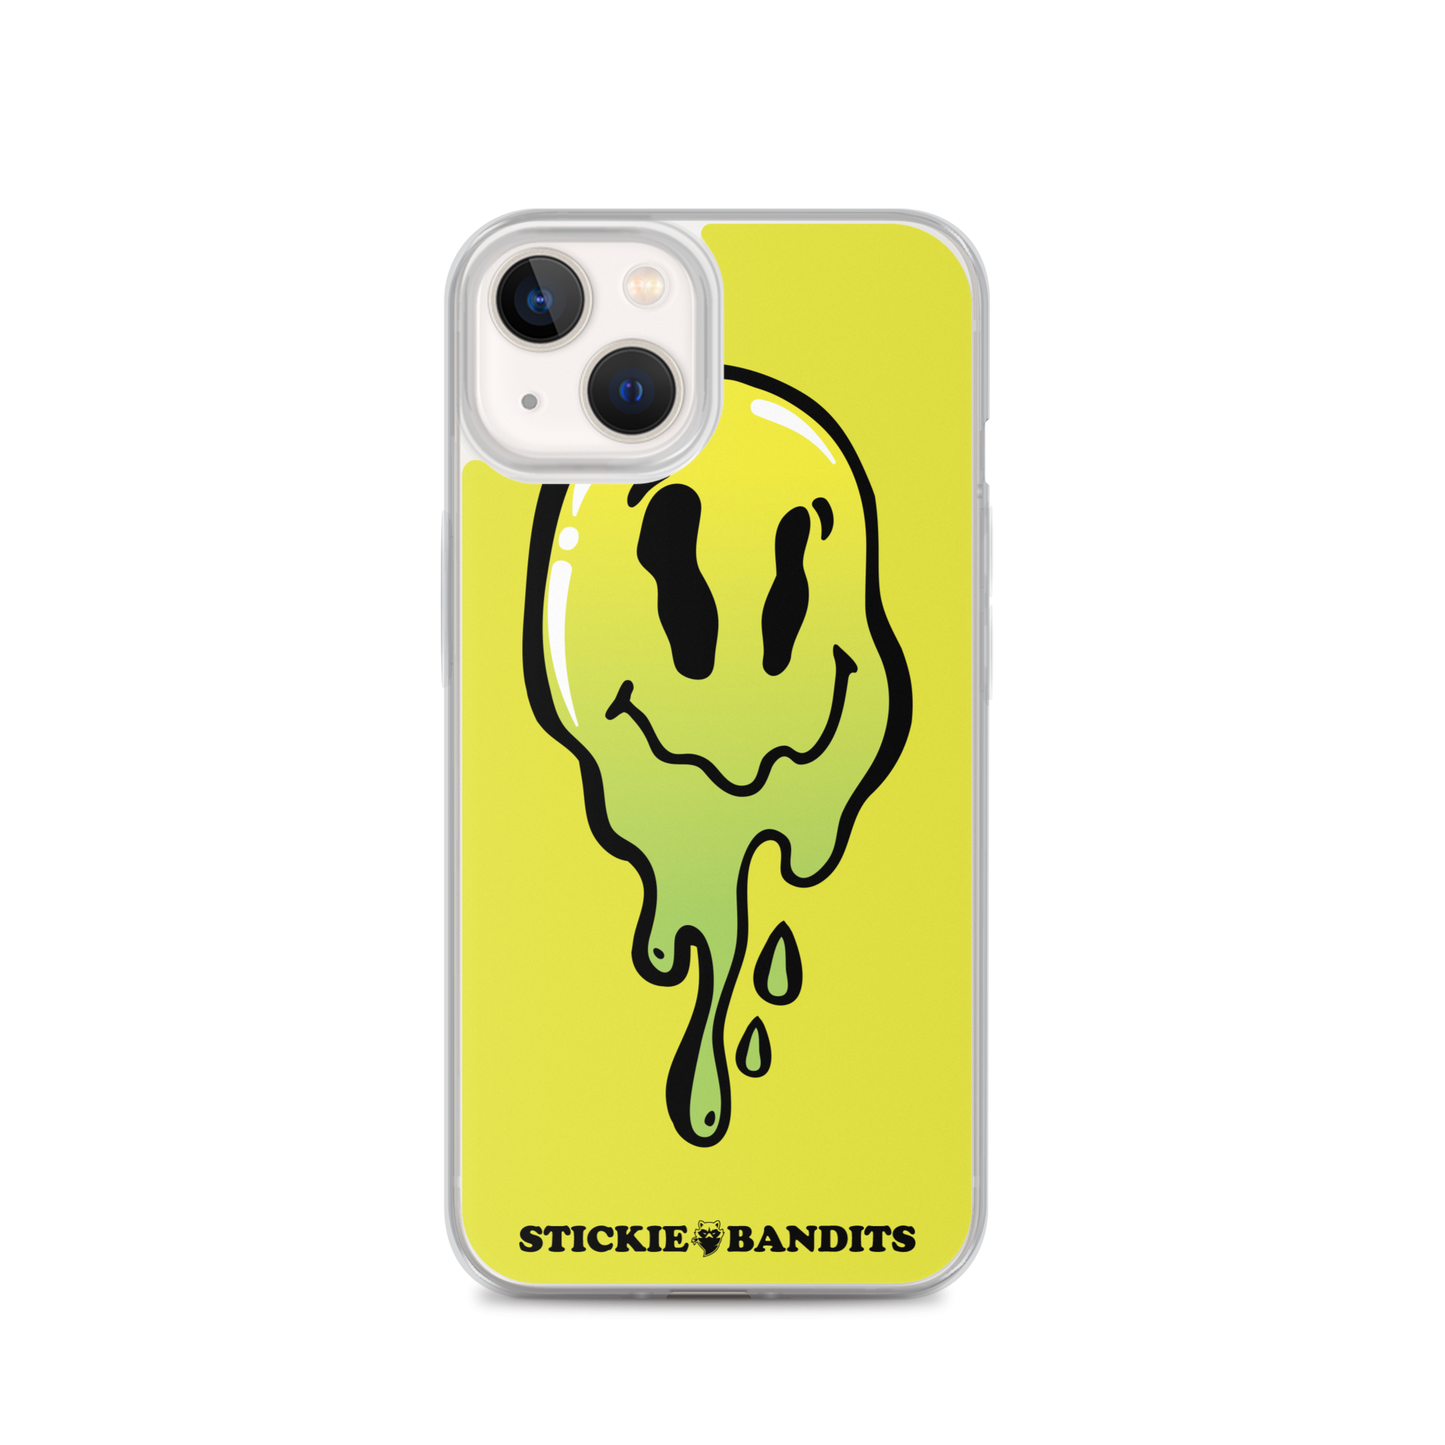 Trippy Face iPhone Case